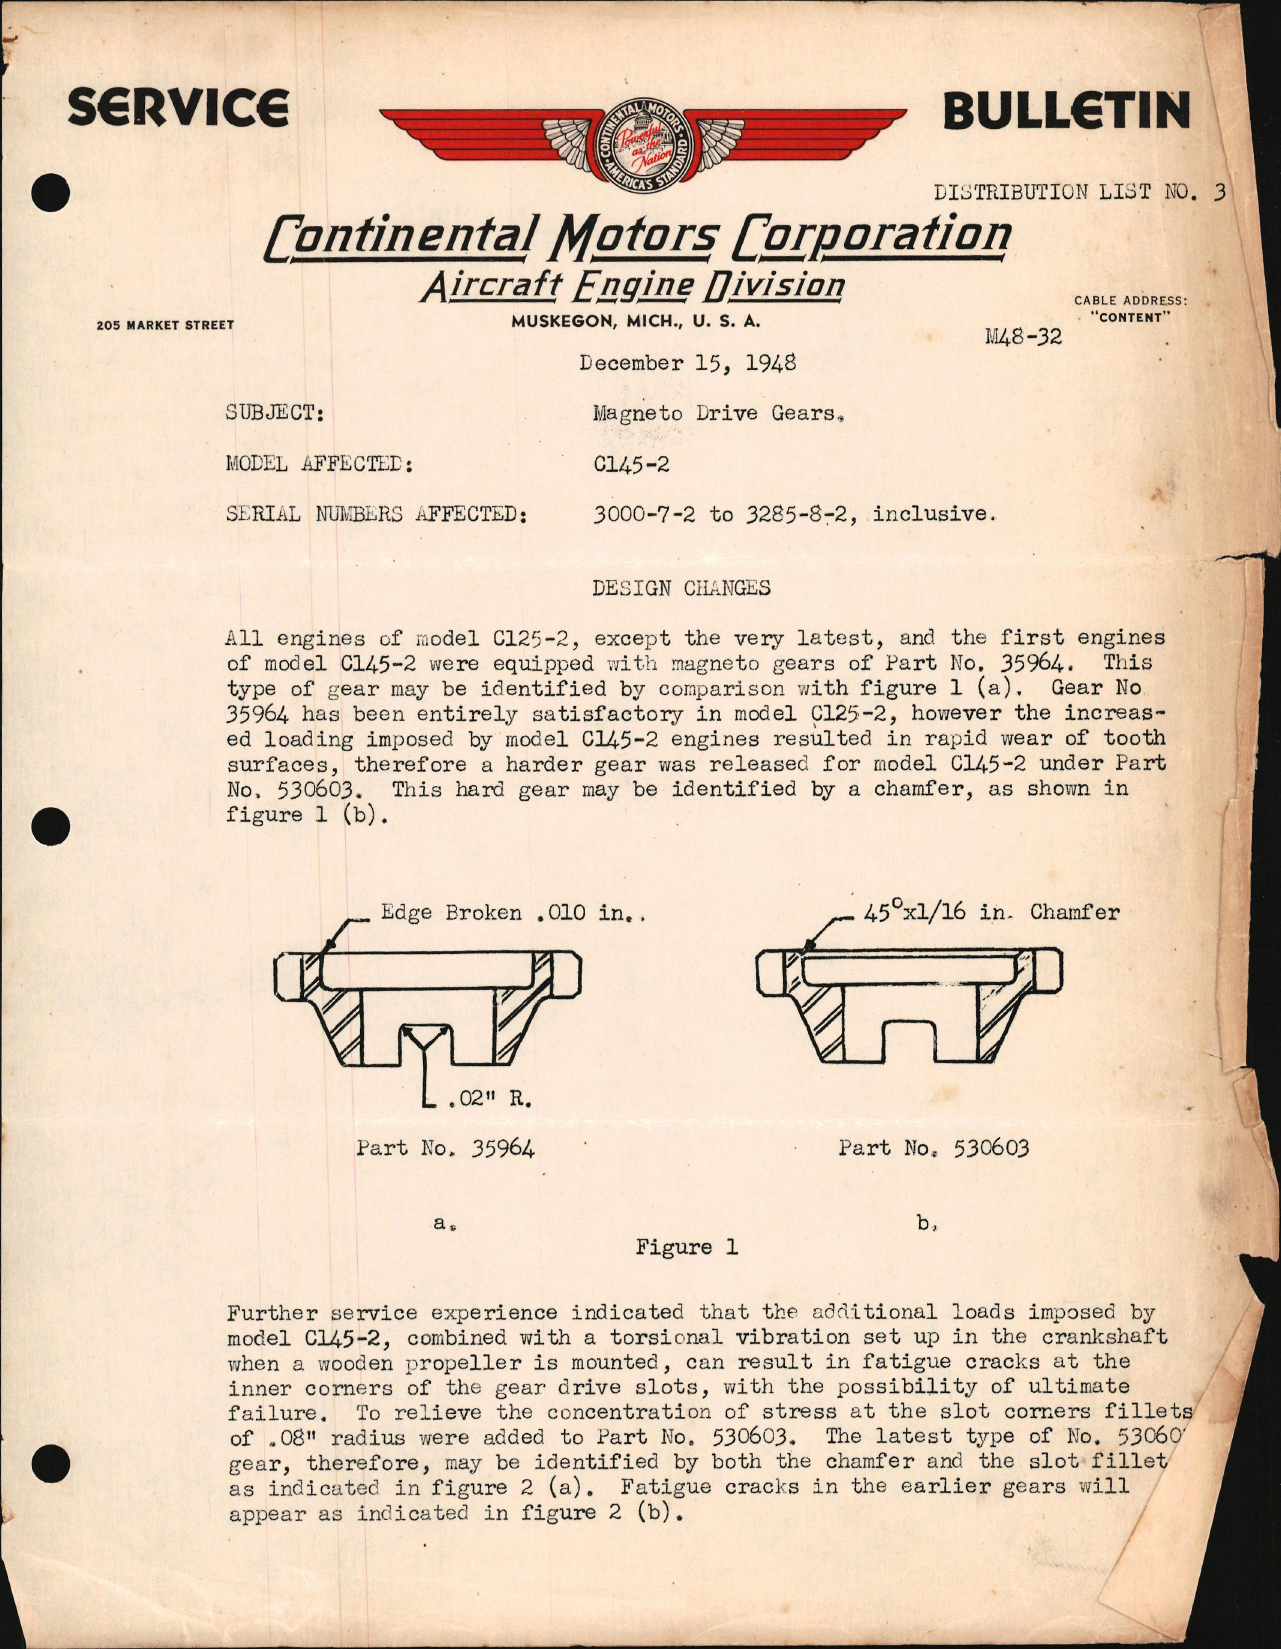 Sample page 1 from AirCorps Library document: Magneto Drive Gears